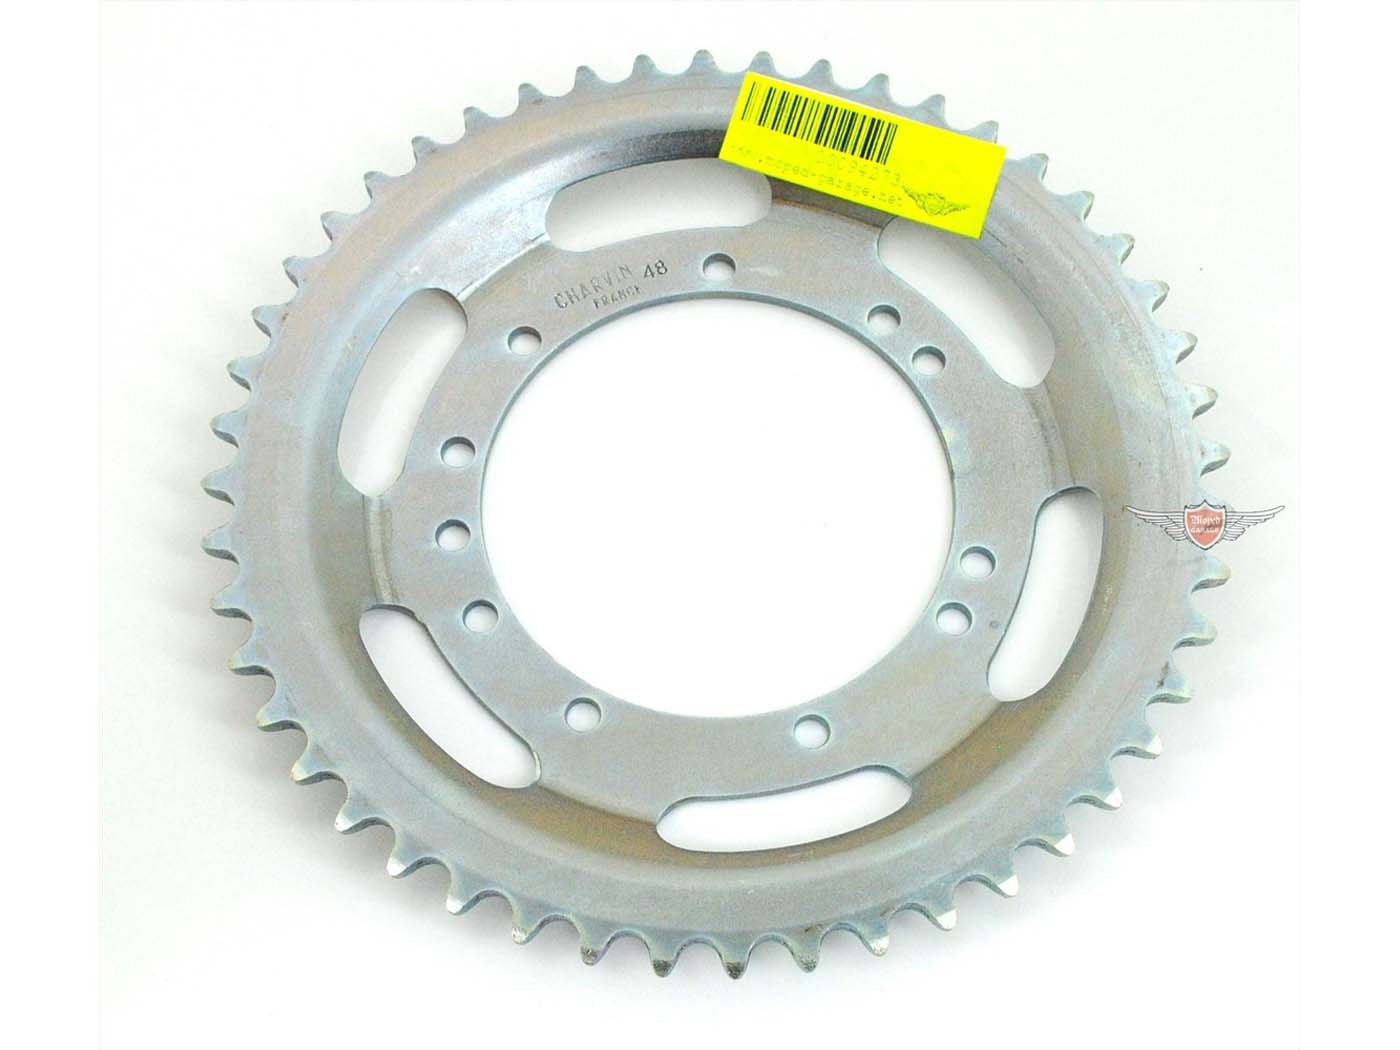 Chain Wheel 48 Teeth Reinforced Cast Wheel For Peugeot 103 Moped Tuning